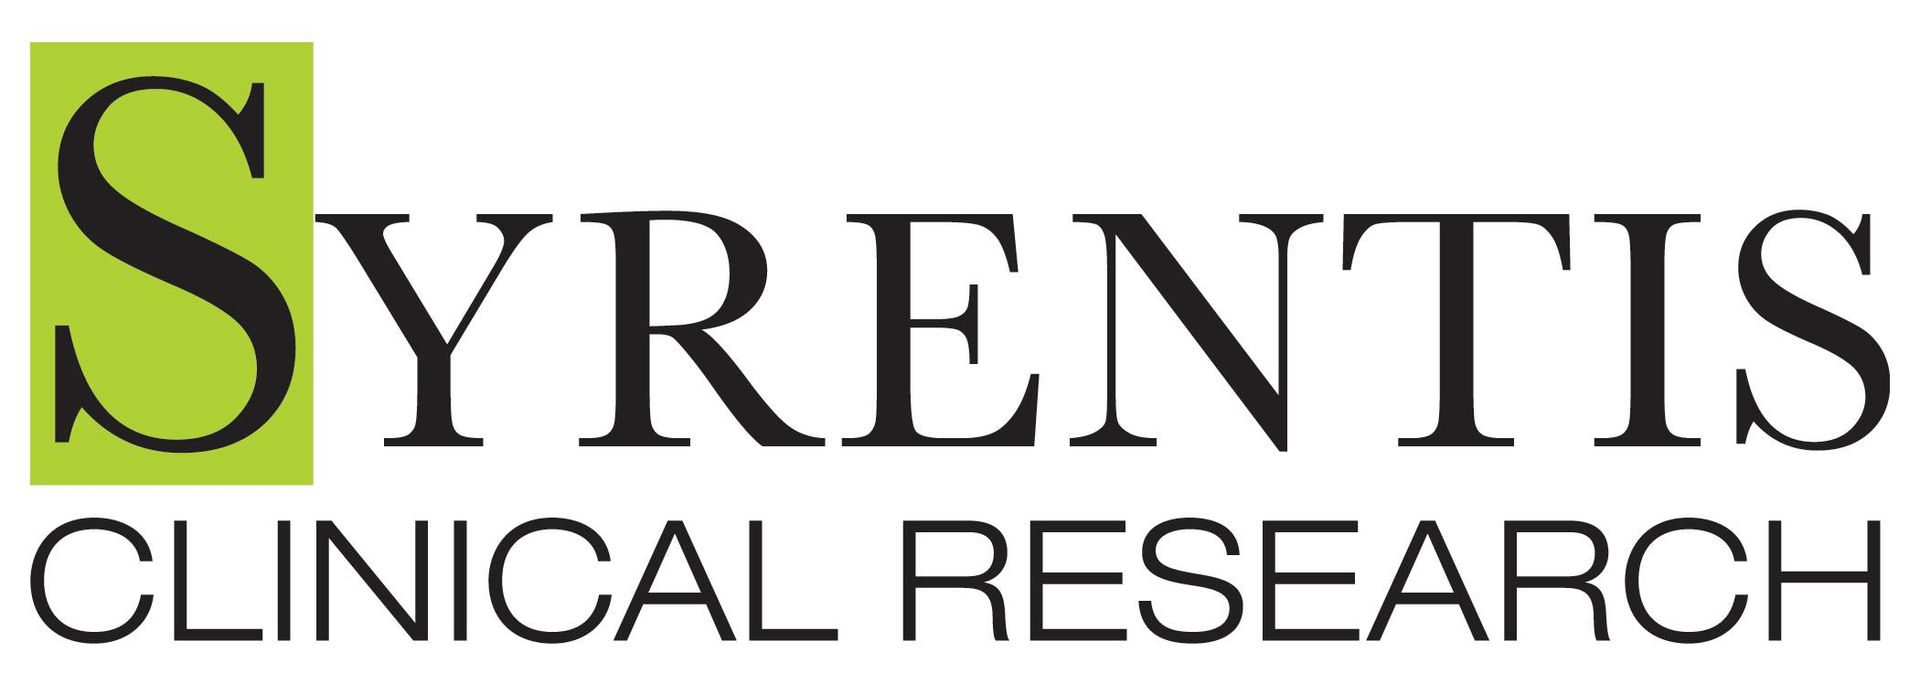 Syrentis Clinical Research | Logo